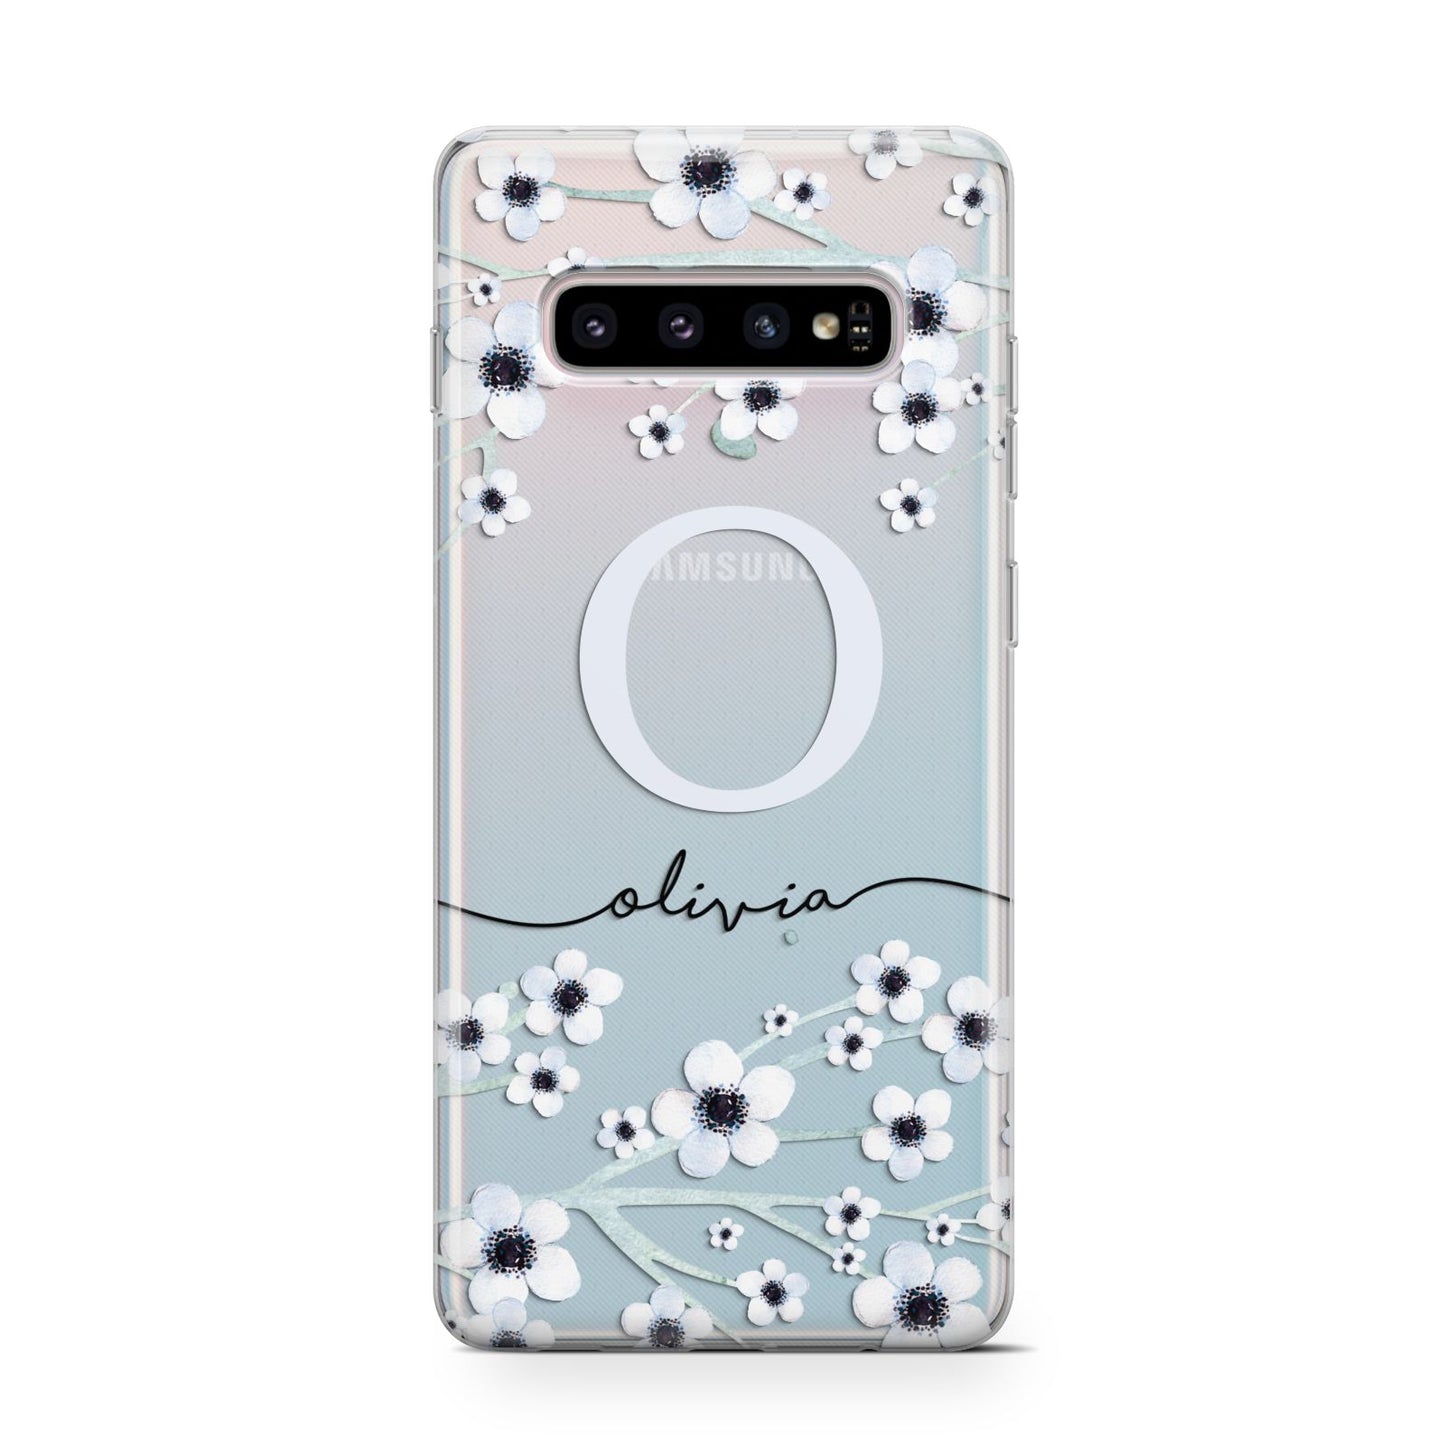 Personalised White Flower Samsung Galaxy S10 Case